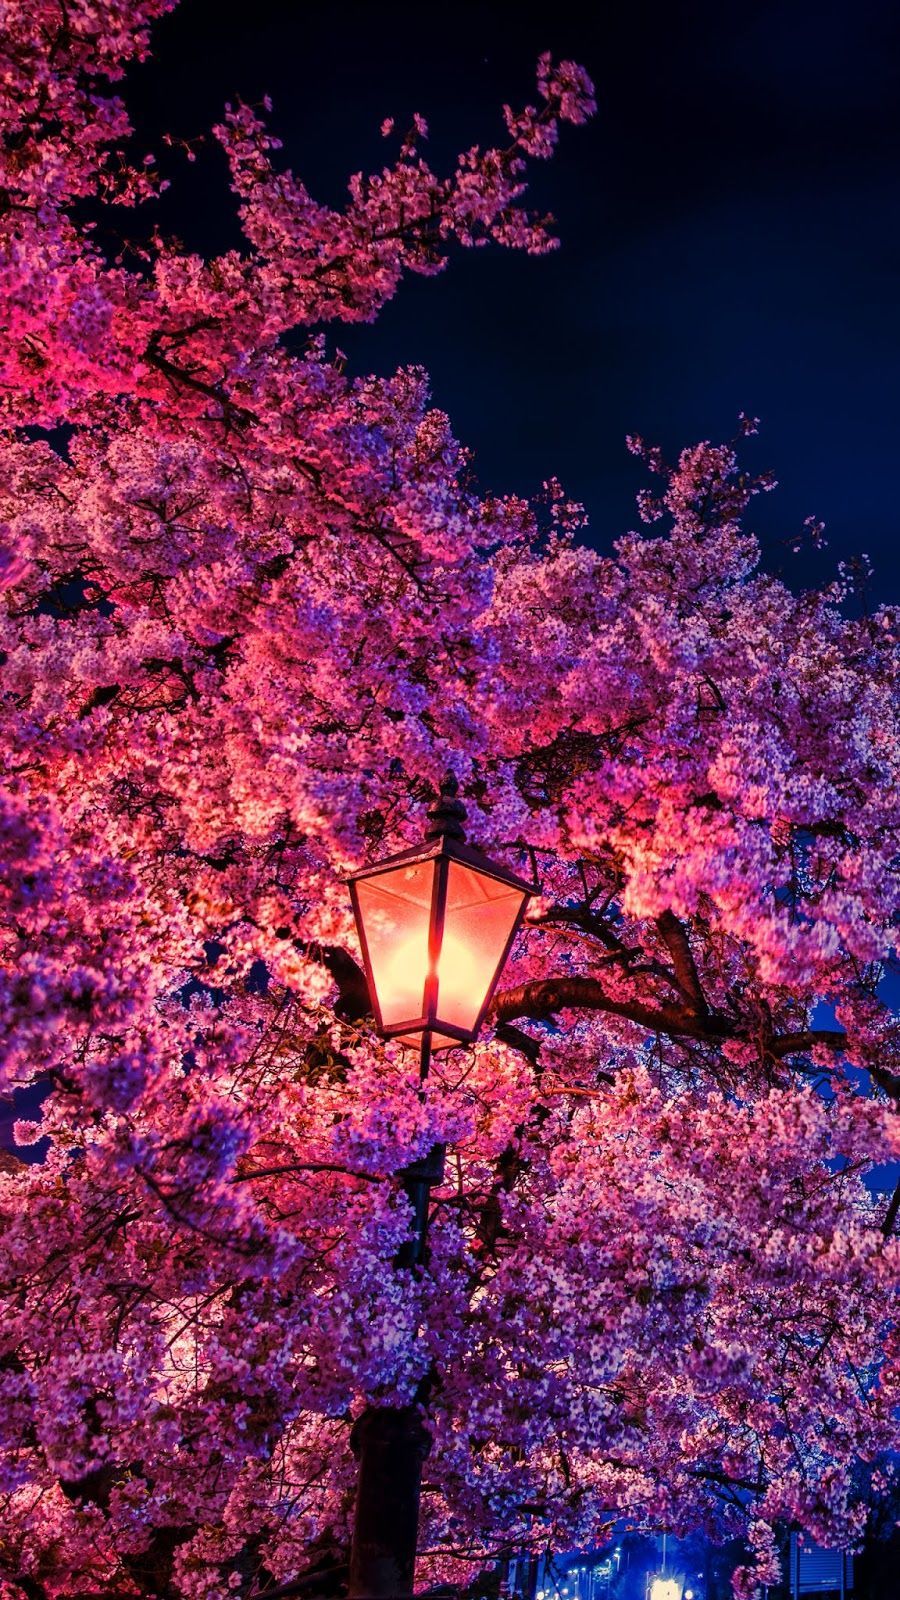 Cherry blossom in the night. Cherry blossom wallpaper iphone